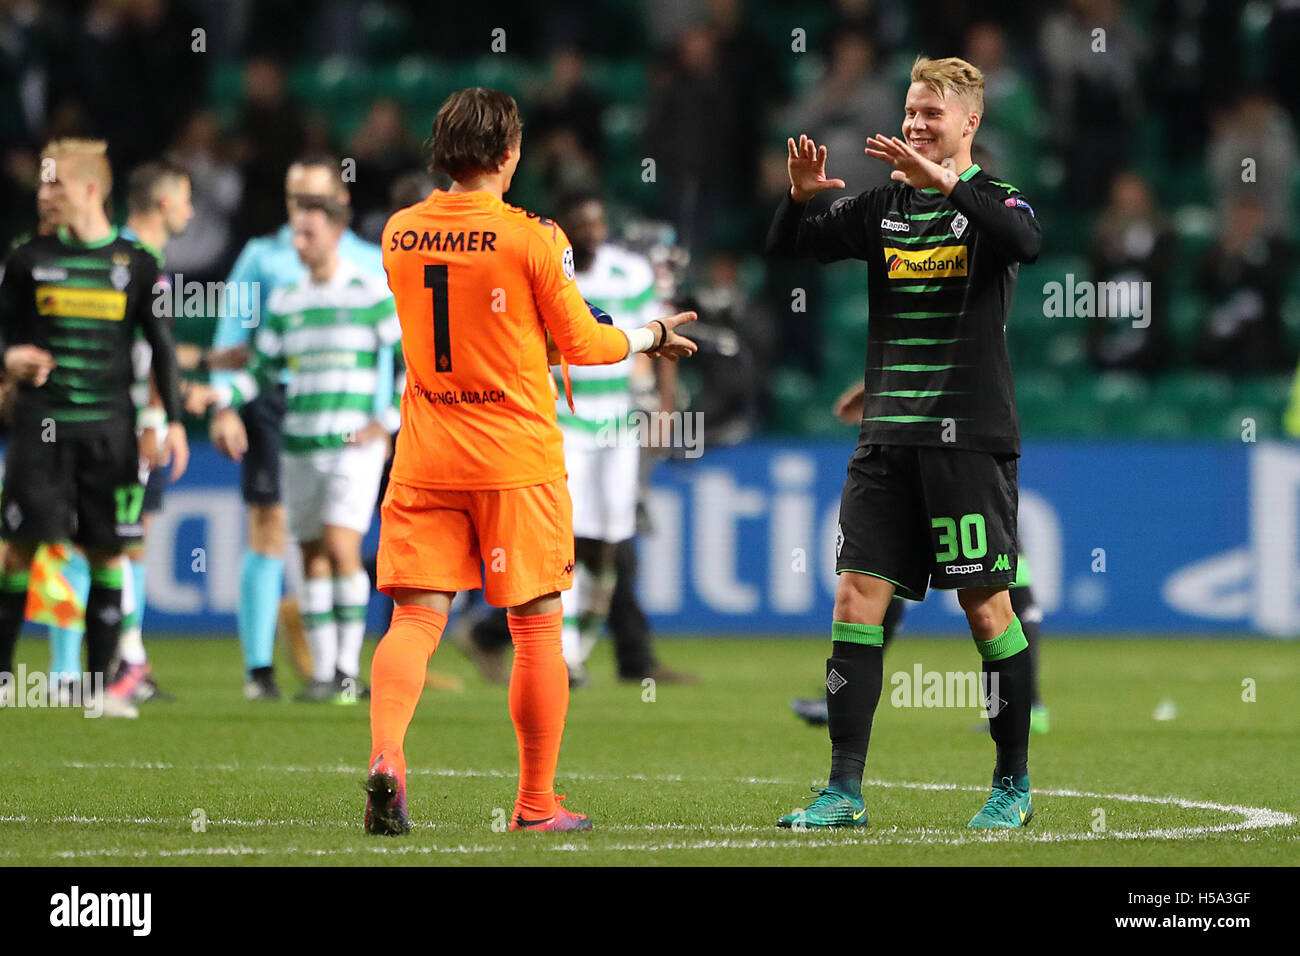 Borussia Monchengladbach goalkeeper Yann Sommer (left) and Borussia Monchengladbach's Nico Elvedi clebrate after the final whistle during the UEFA Champions League match at Celtic Park, Glasgow. Stock Photo